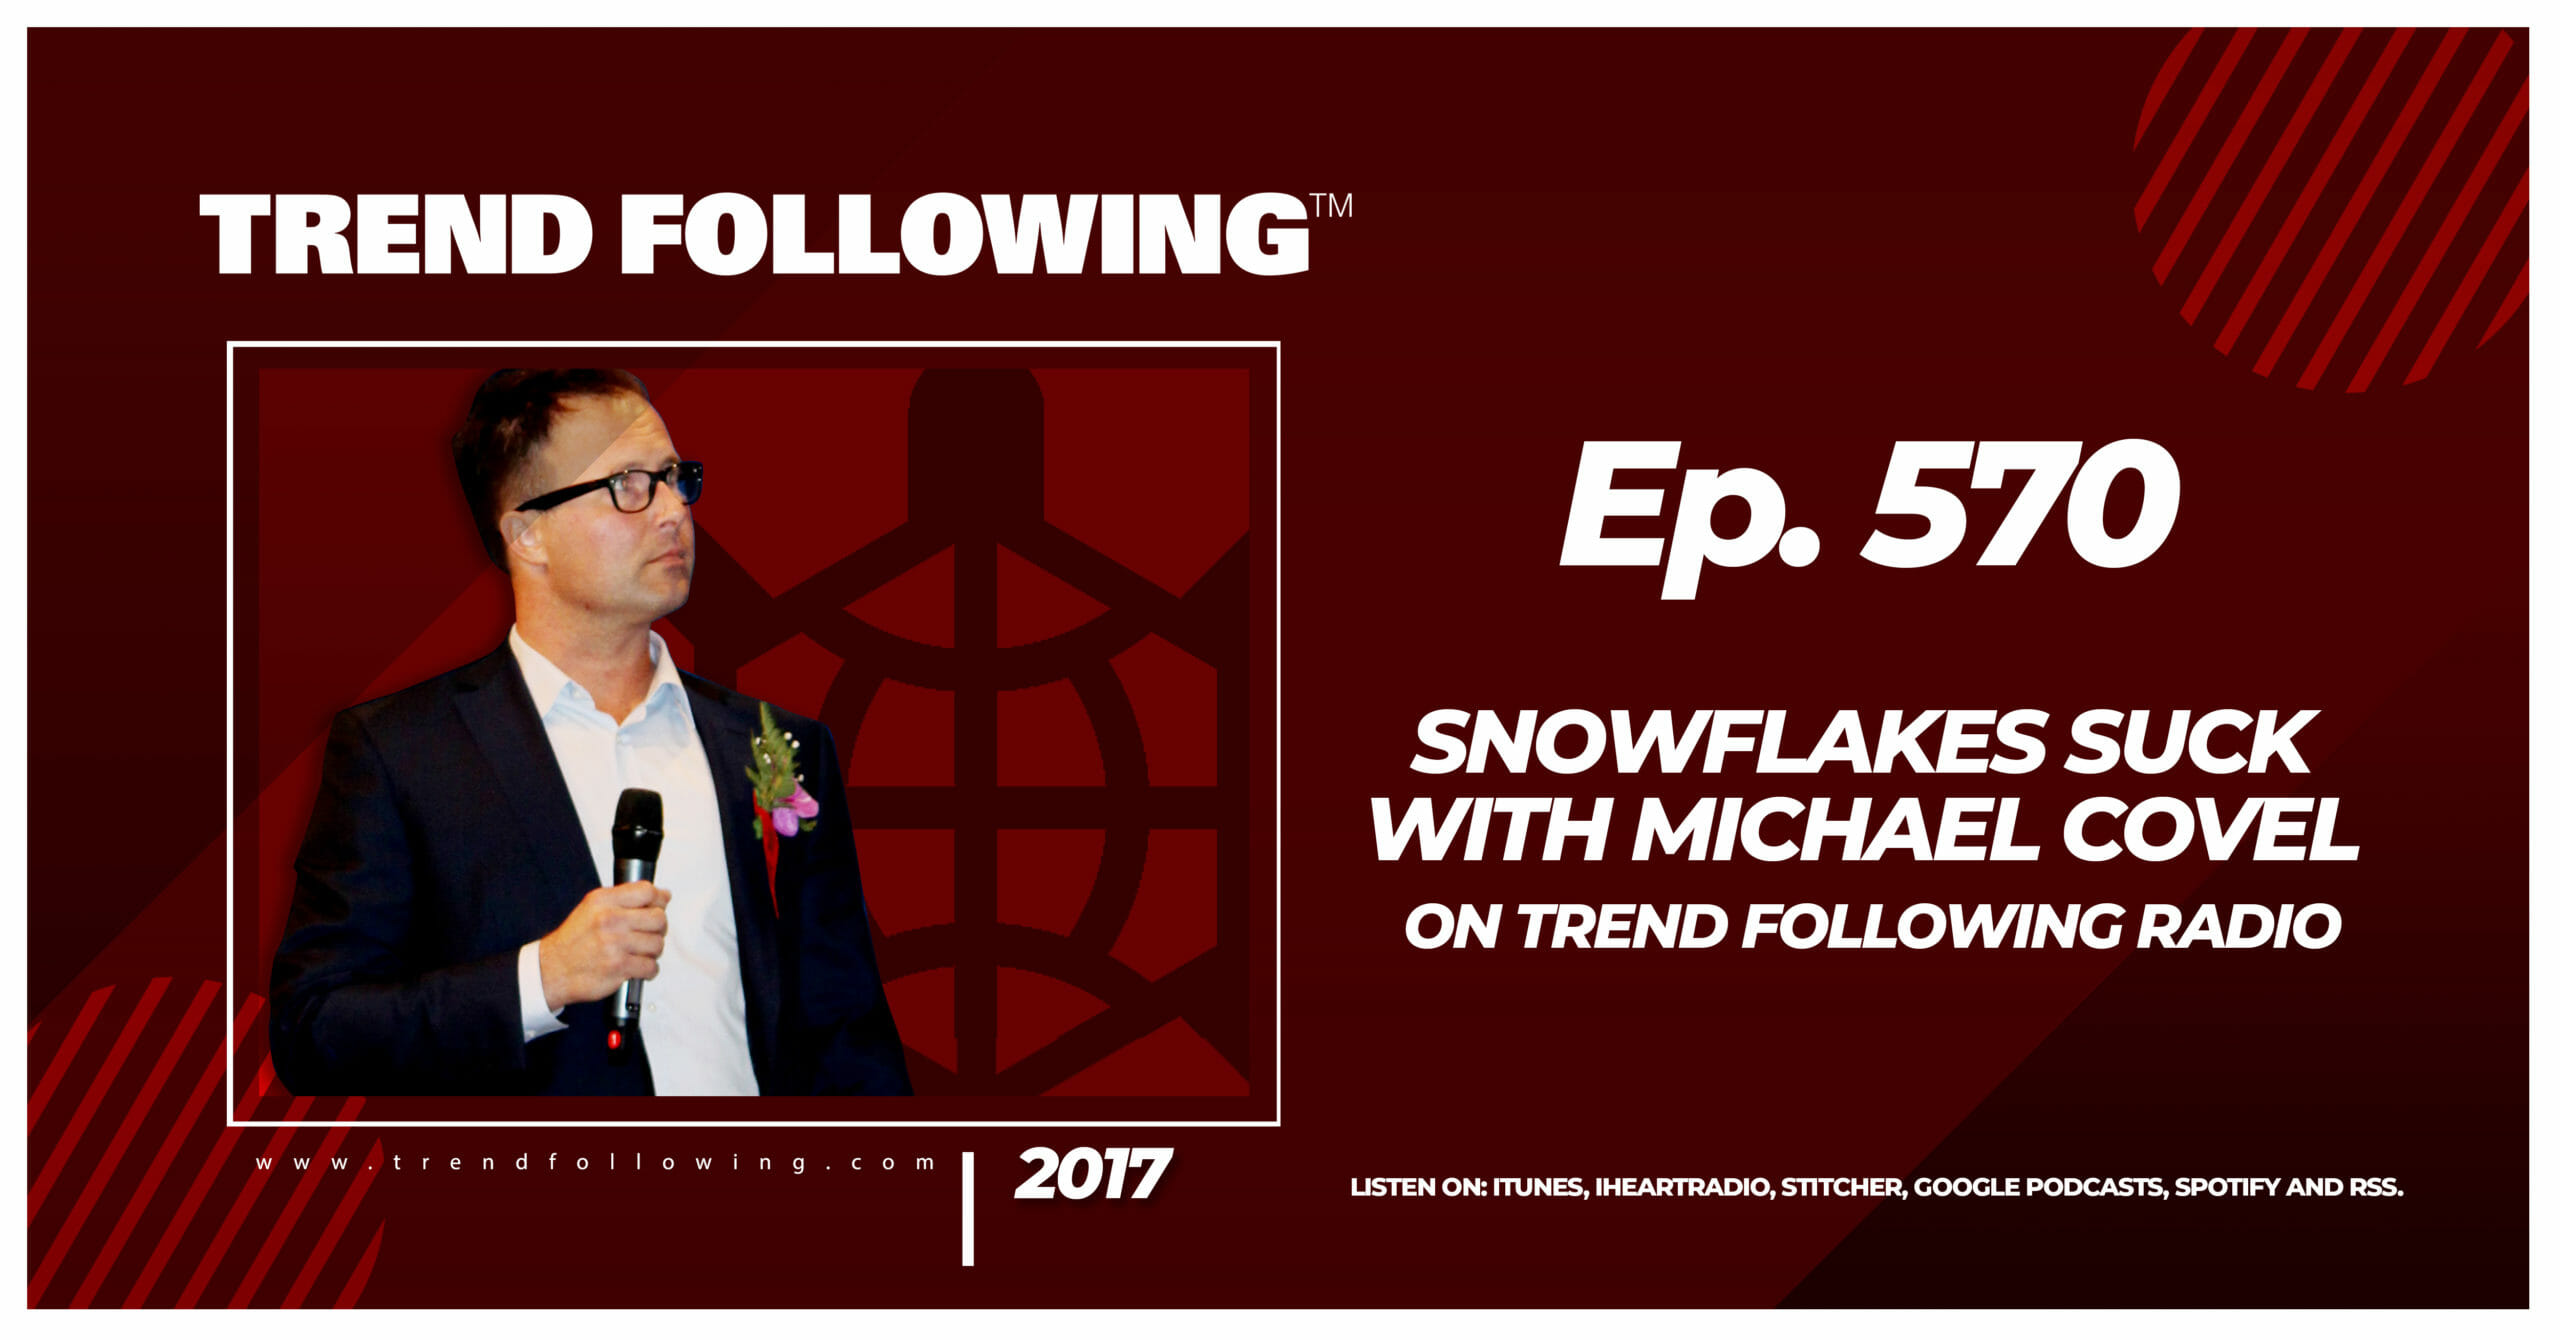 Snowflakes Suck with Michael Covel on Trend Following Radio